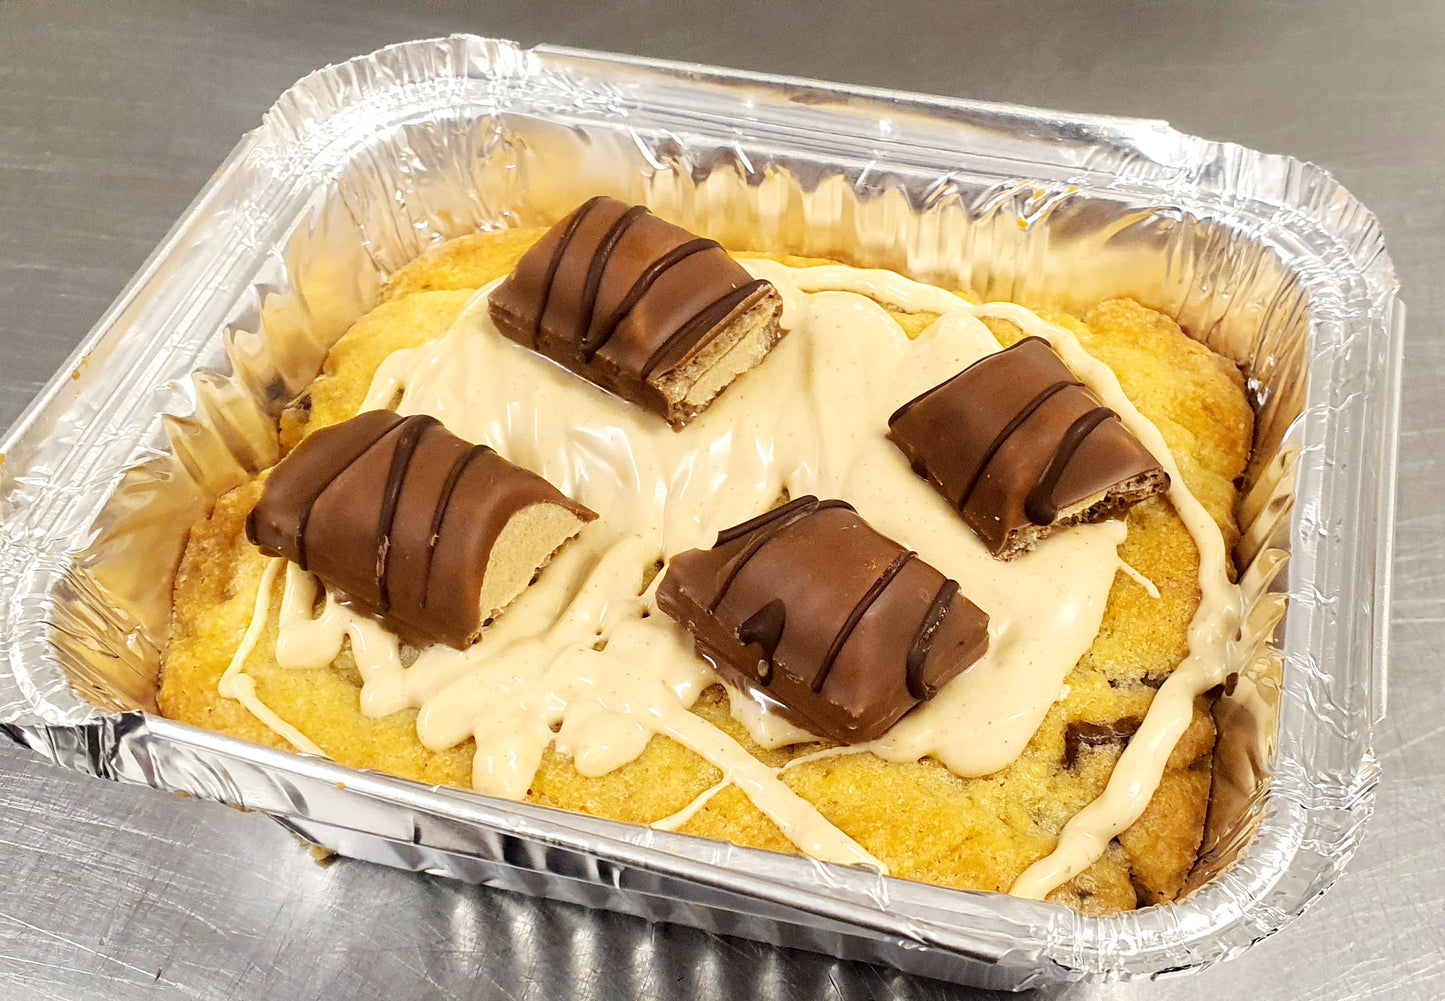 Bake at Home - Kinderella Hot Cookie Dough Tray serves 2 - AVAILABLE FROM THURSDAY